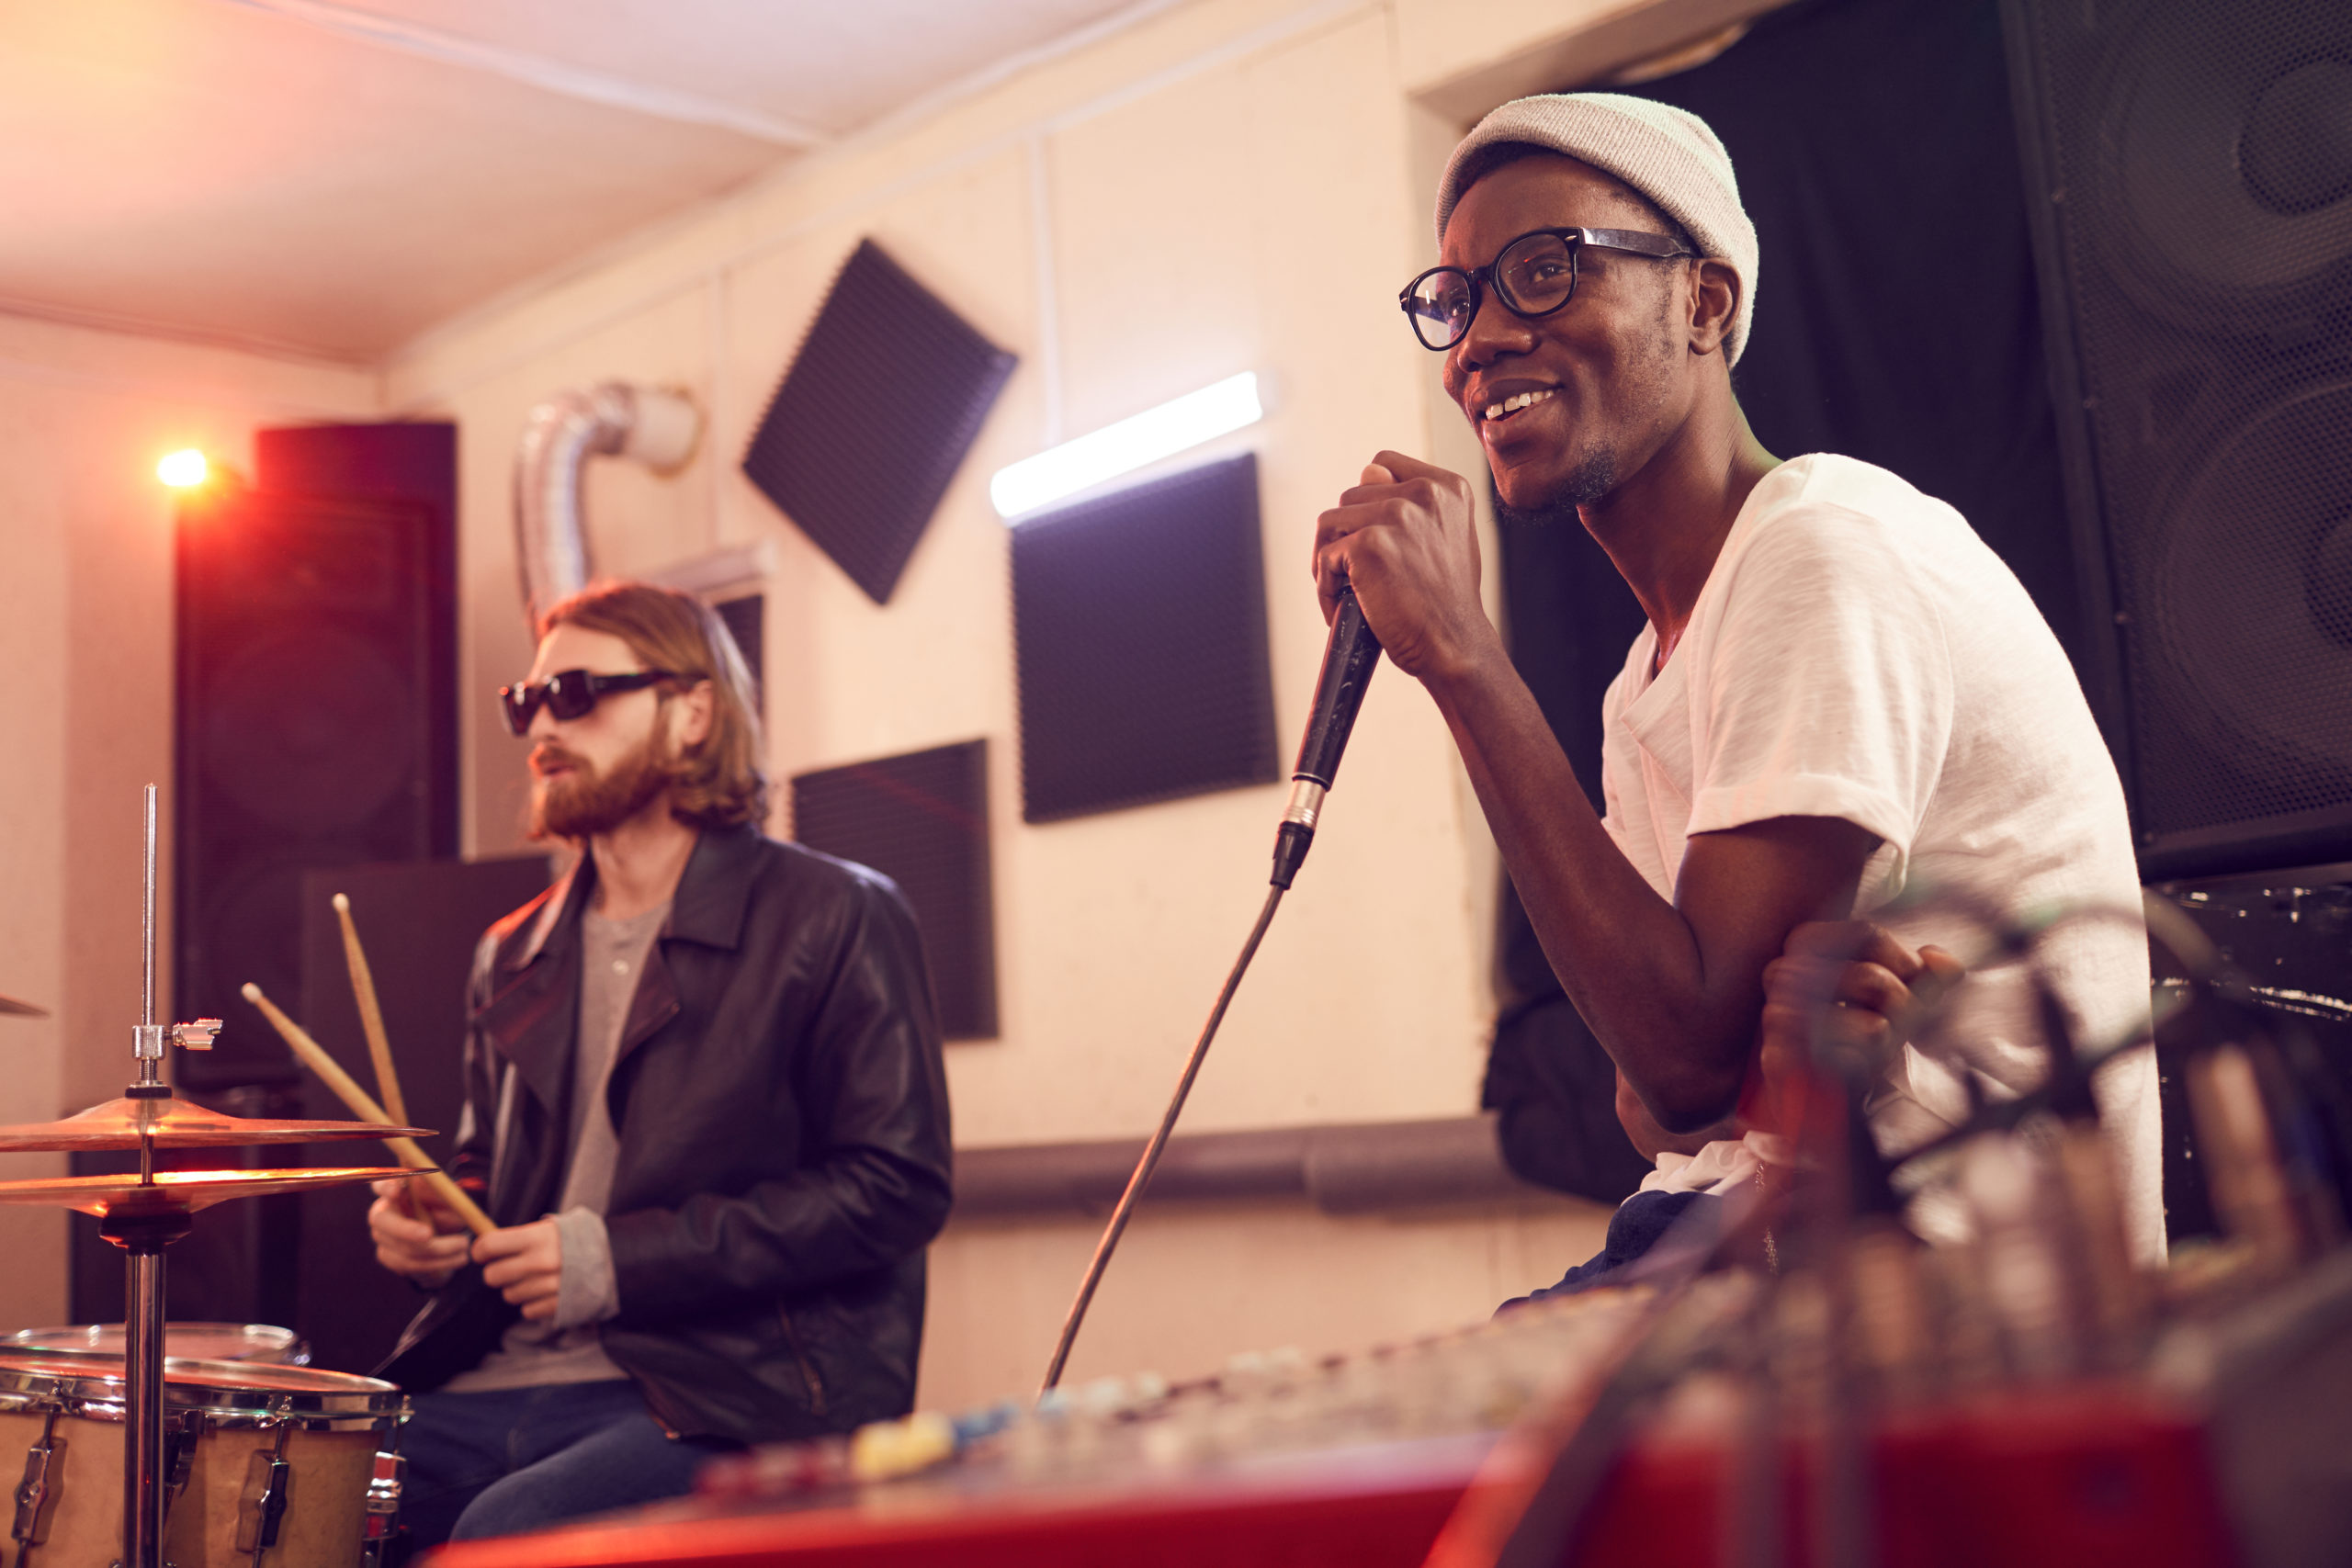 Portrait of contemporary African-American man singing to microphone and smiling happily during rehearsal or concert in music studio, copy space